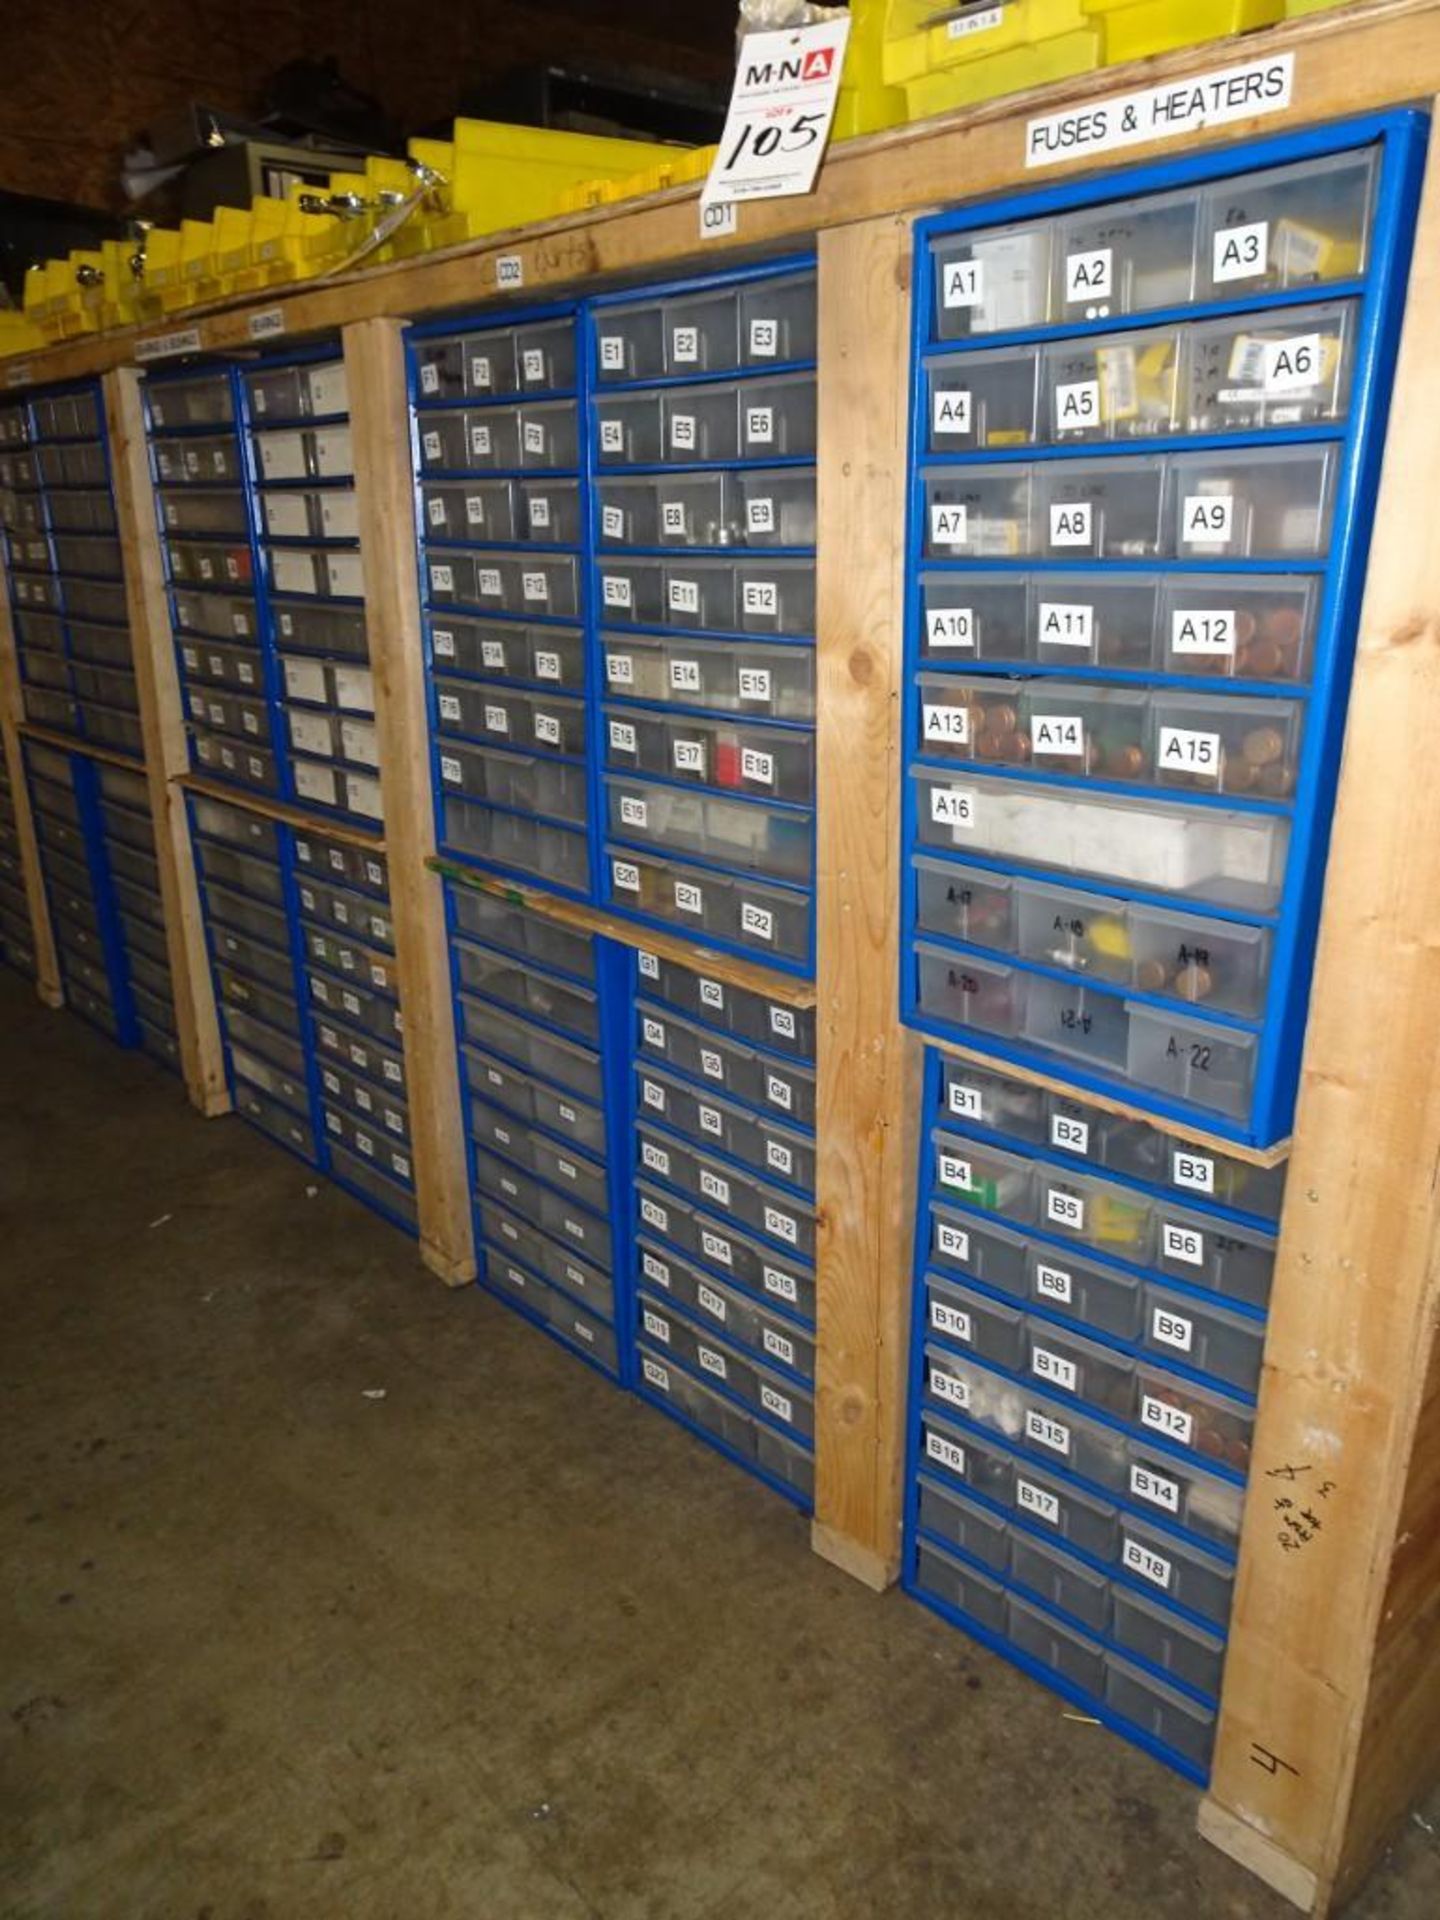 Assorted Fittings, Bushings, Fuses, and Heaters